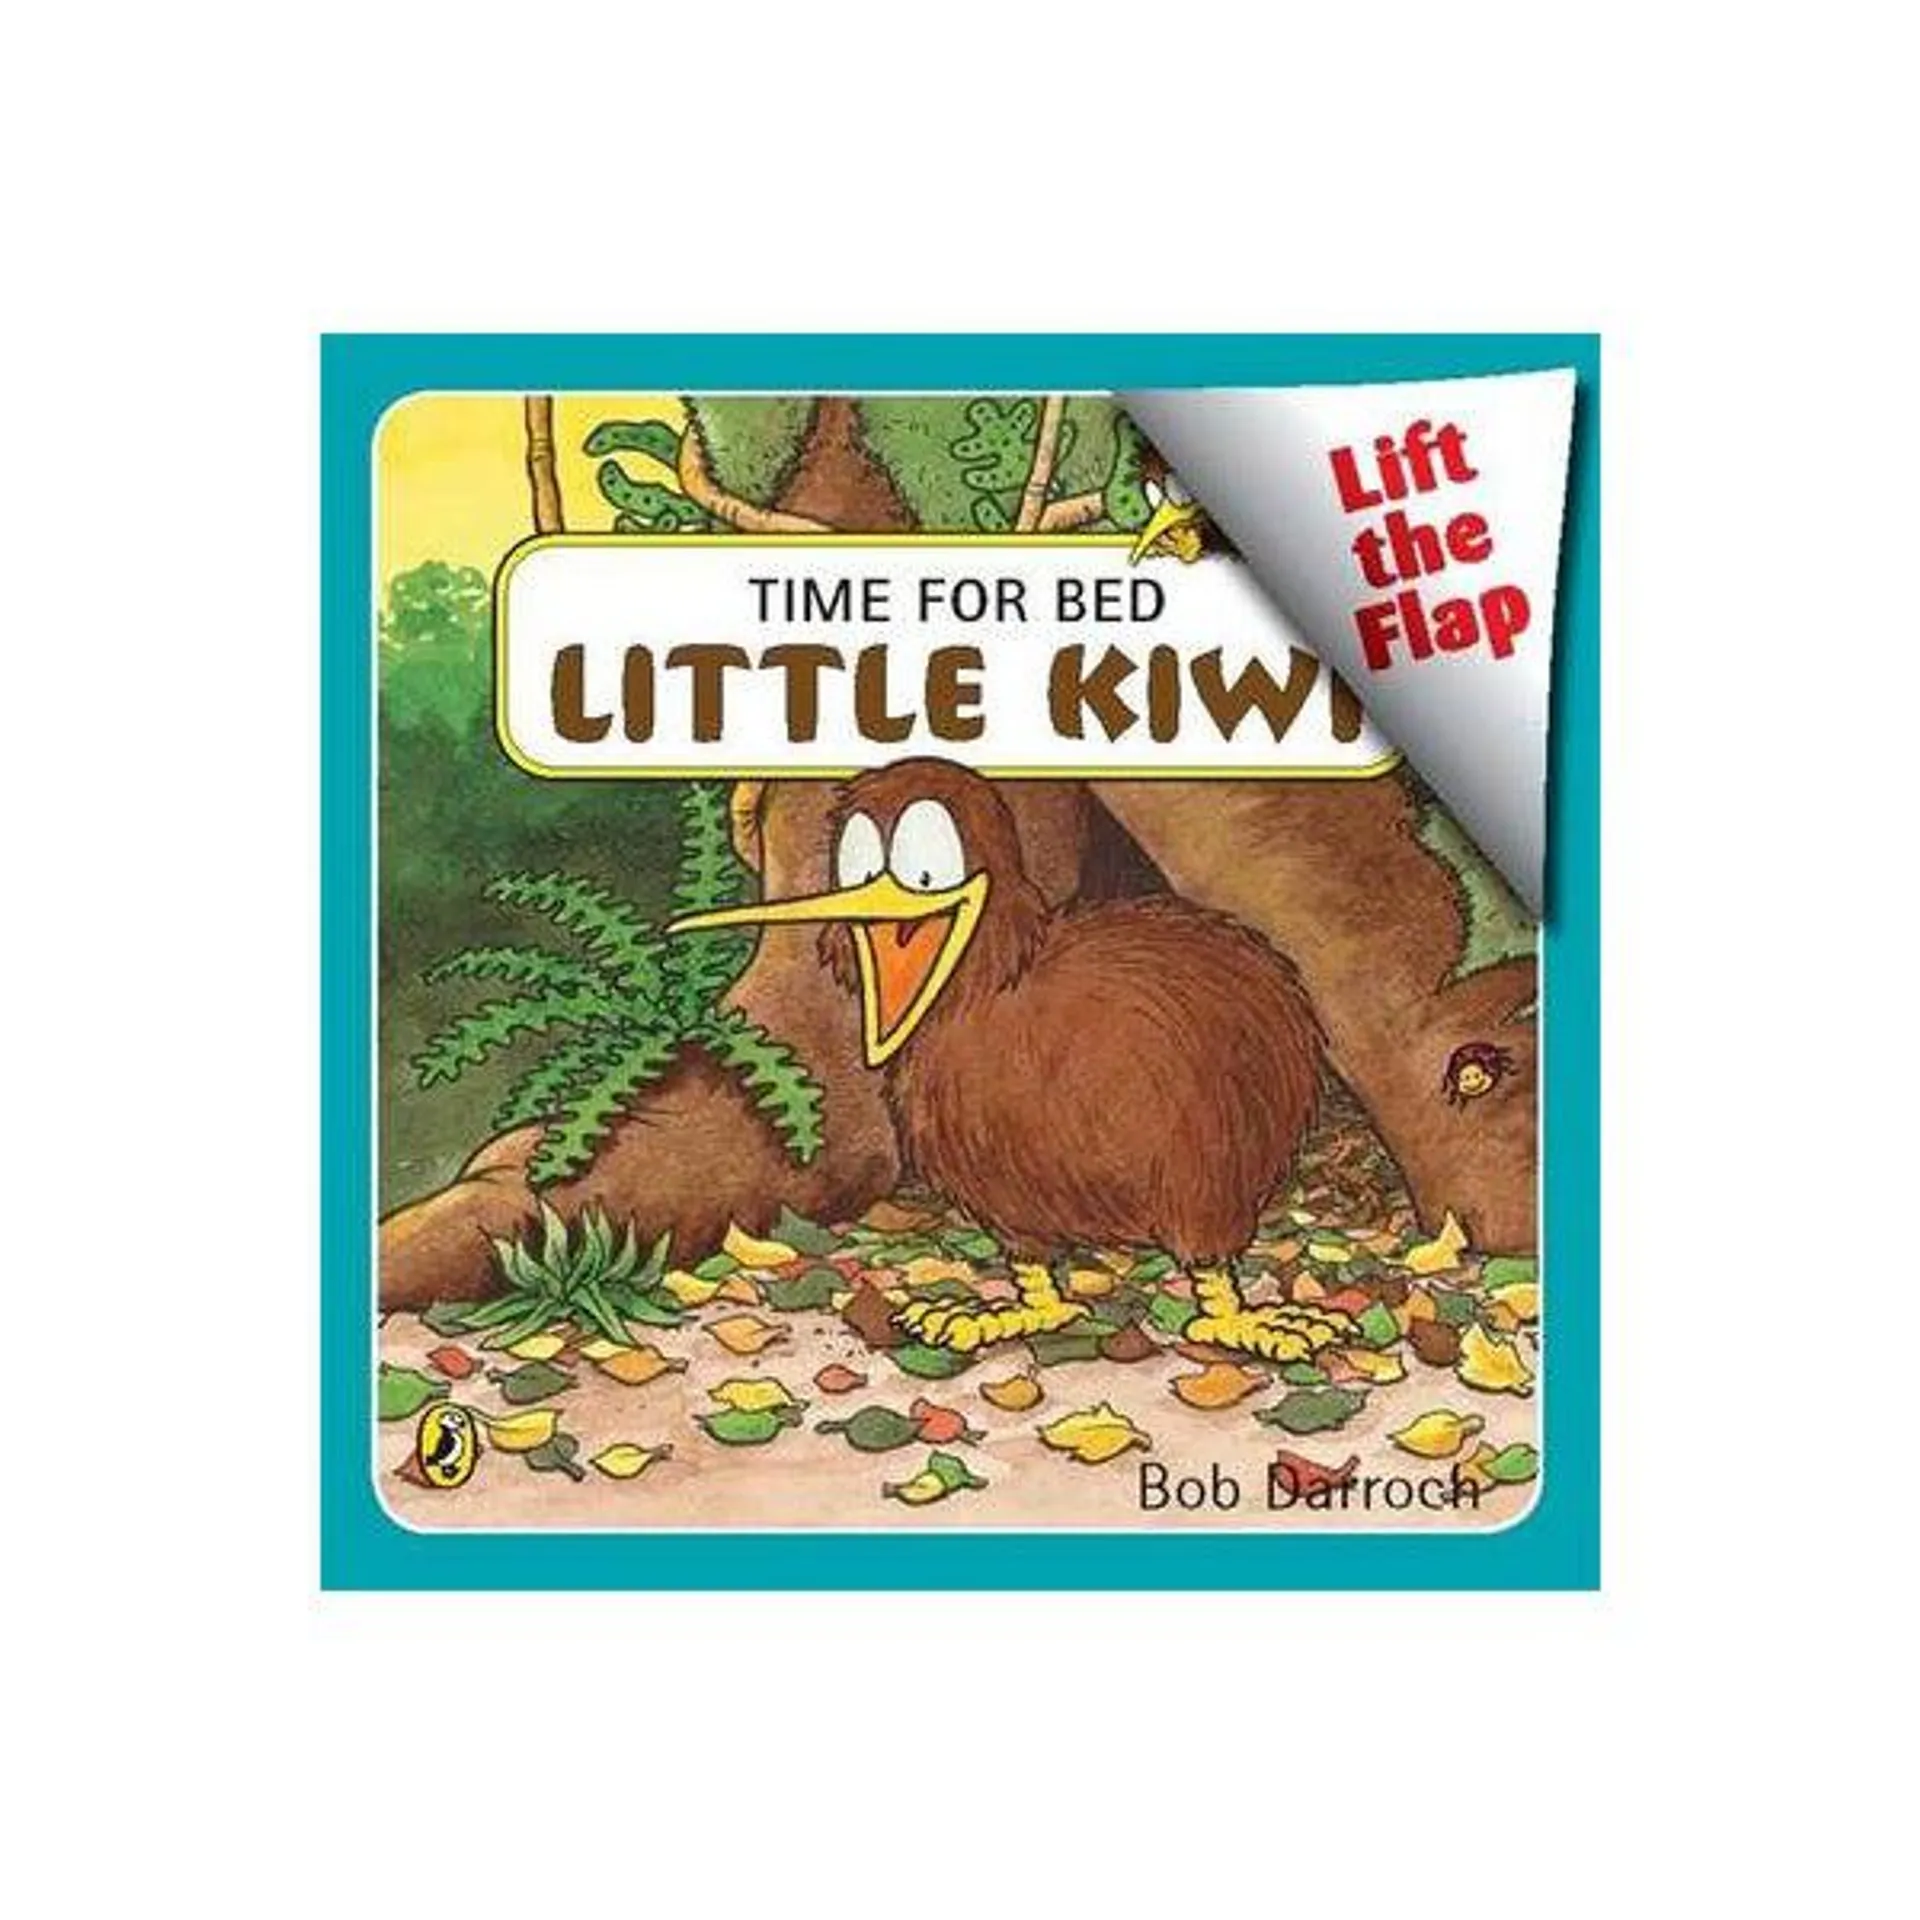 Time for Bed, Little Kiwi: Lift the Flap Paperback